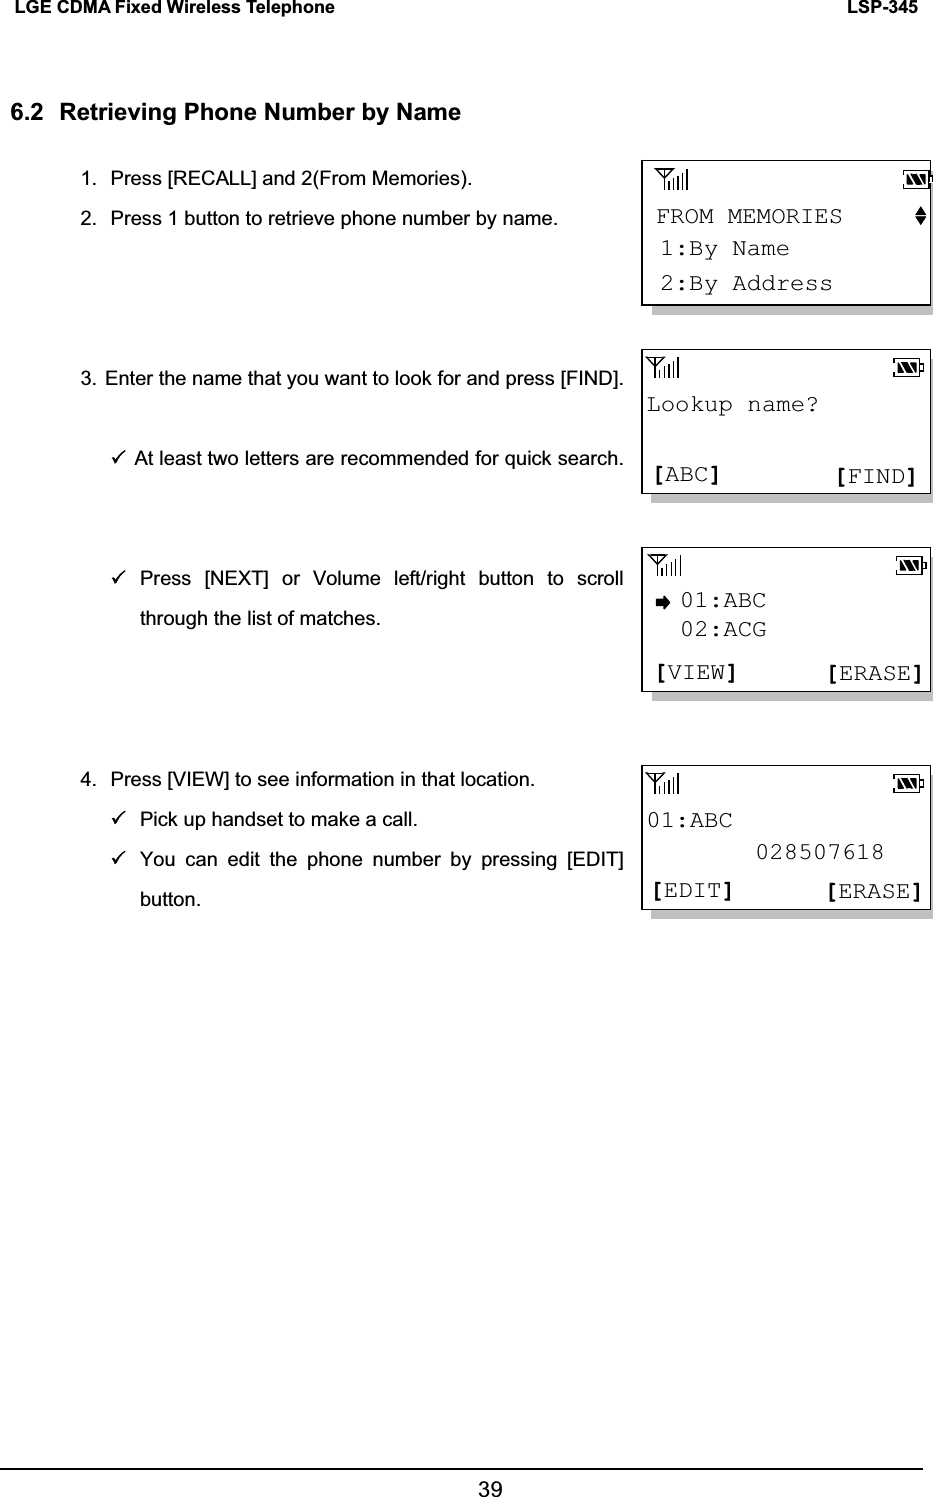 LSP-345LGE CDMA Fixed Wireless Telephone 396.2  Retrieving Phone Number by Name 1.  Press [RECALL] and 2(From Memories). 2.  Press 1 button to retrieve phone number by name. 3. Enter the name that you want to look for and press [FIND]. 3At least two letters are recommended for quick search. 3Press [NEXT] or Volume left/right button to scroll through the list of matches.   4.  Press [VIEW] to see information in that location.   3Pick up handset to make a call. 3You can edit the phone number by pressing [EDIT] button. Lookup name?[FIND][ABC]01:ABC         028507618[ERASE][EDIT]01:ABC[ERASE][VIEW]02:ACGFROM MEMORIES2:By Address1:By Name